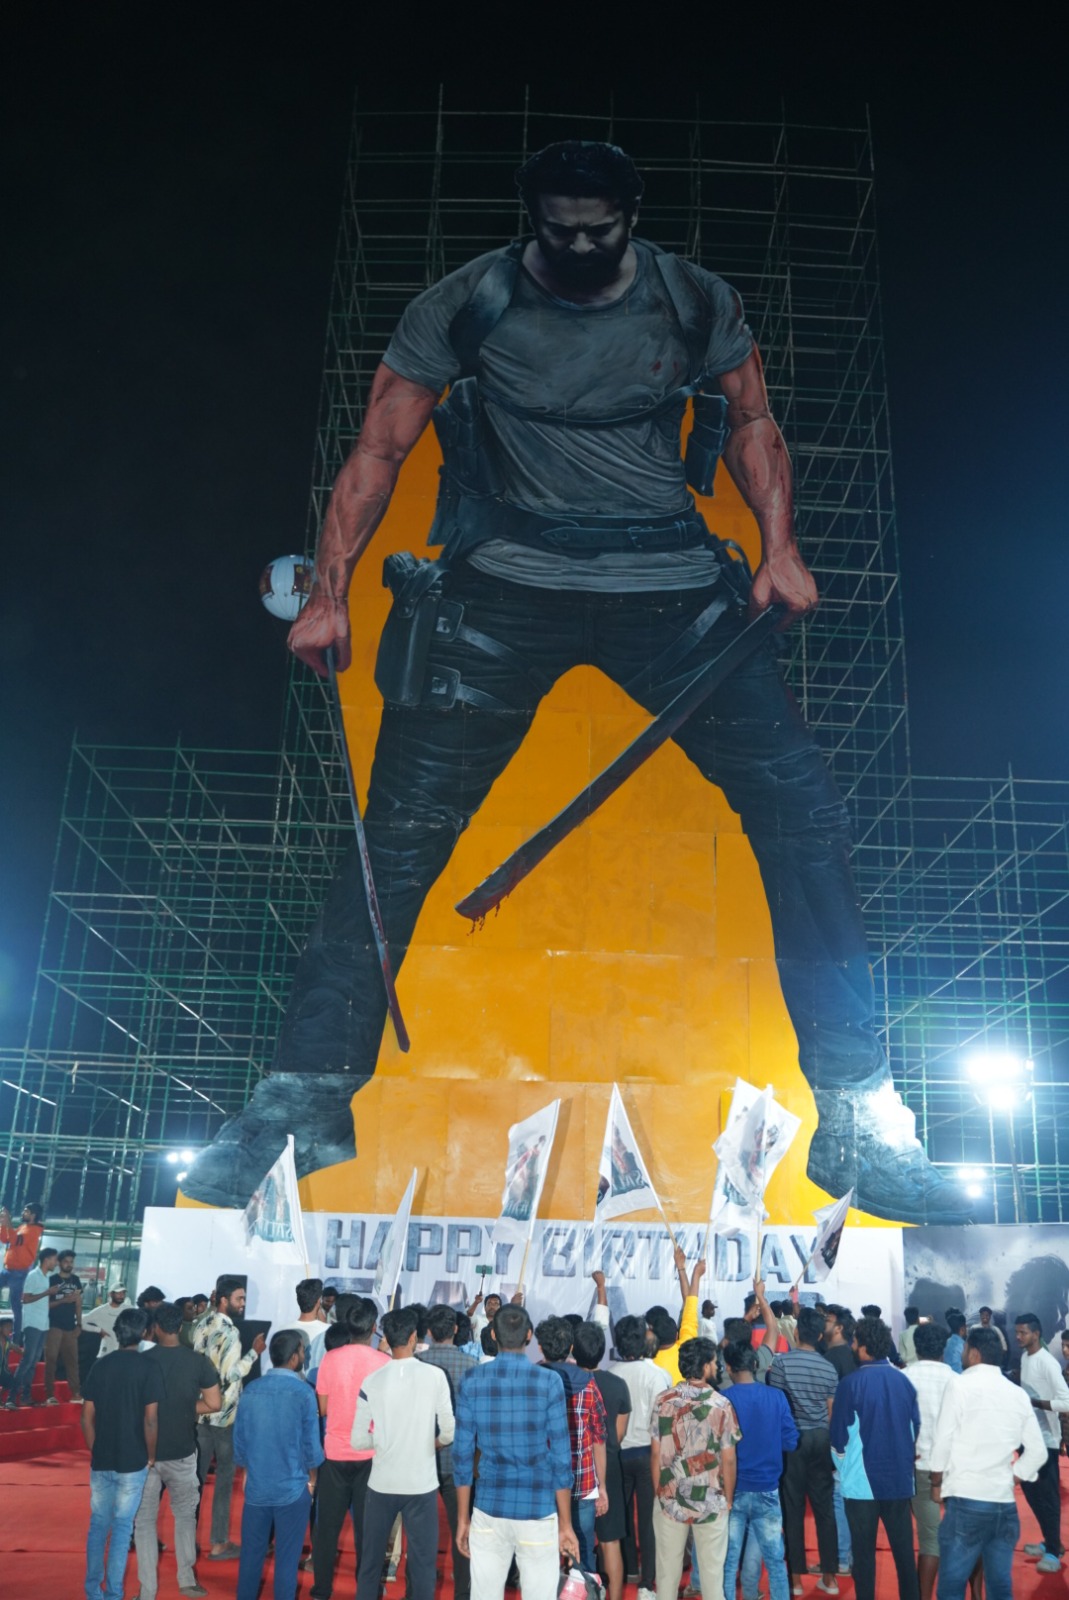 Prabhas fans celebrate his birthday by creating the biggest cutout of his poster from Salaar